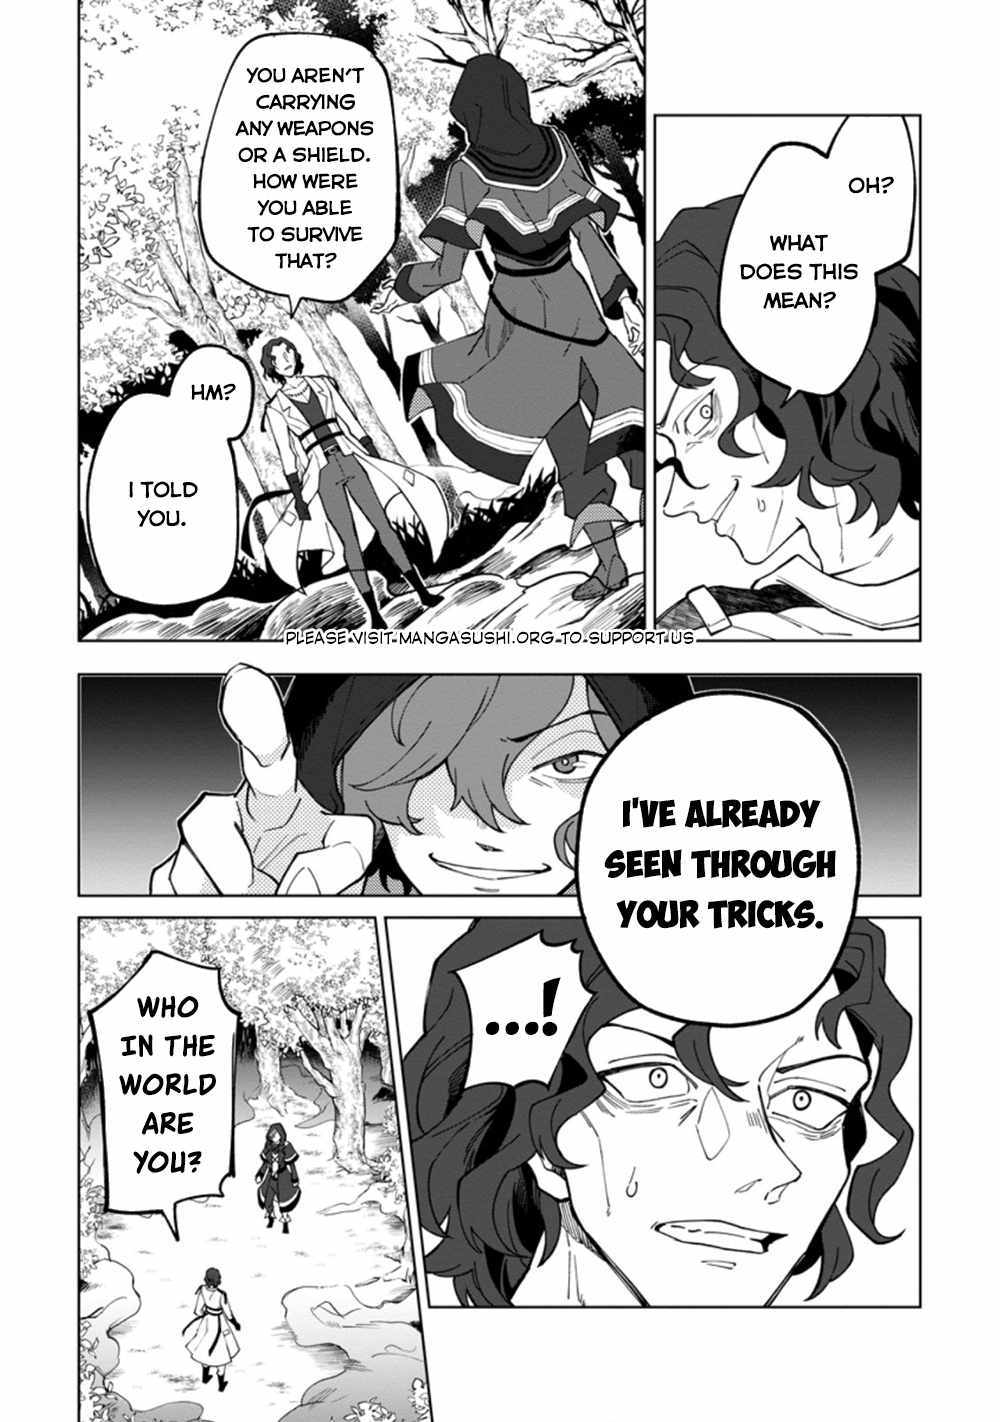 The White Mage Who Was Banished From the Hero's Party Is Picked up by an S Rank Adventurer ~ This White Mage Is Too Out of the Ordinary! Chapter 16-2-eng-li - Page 11